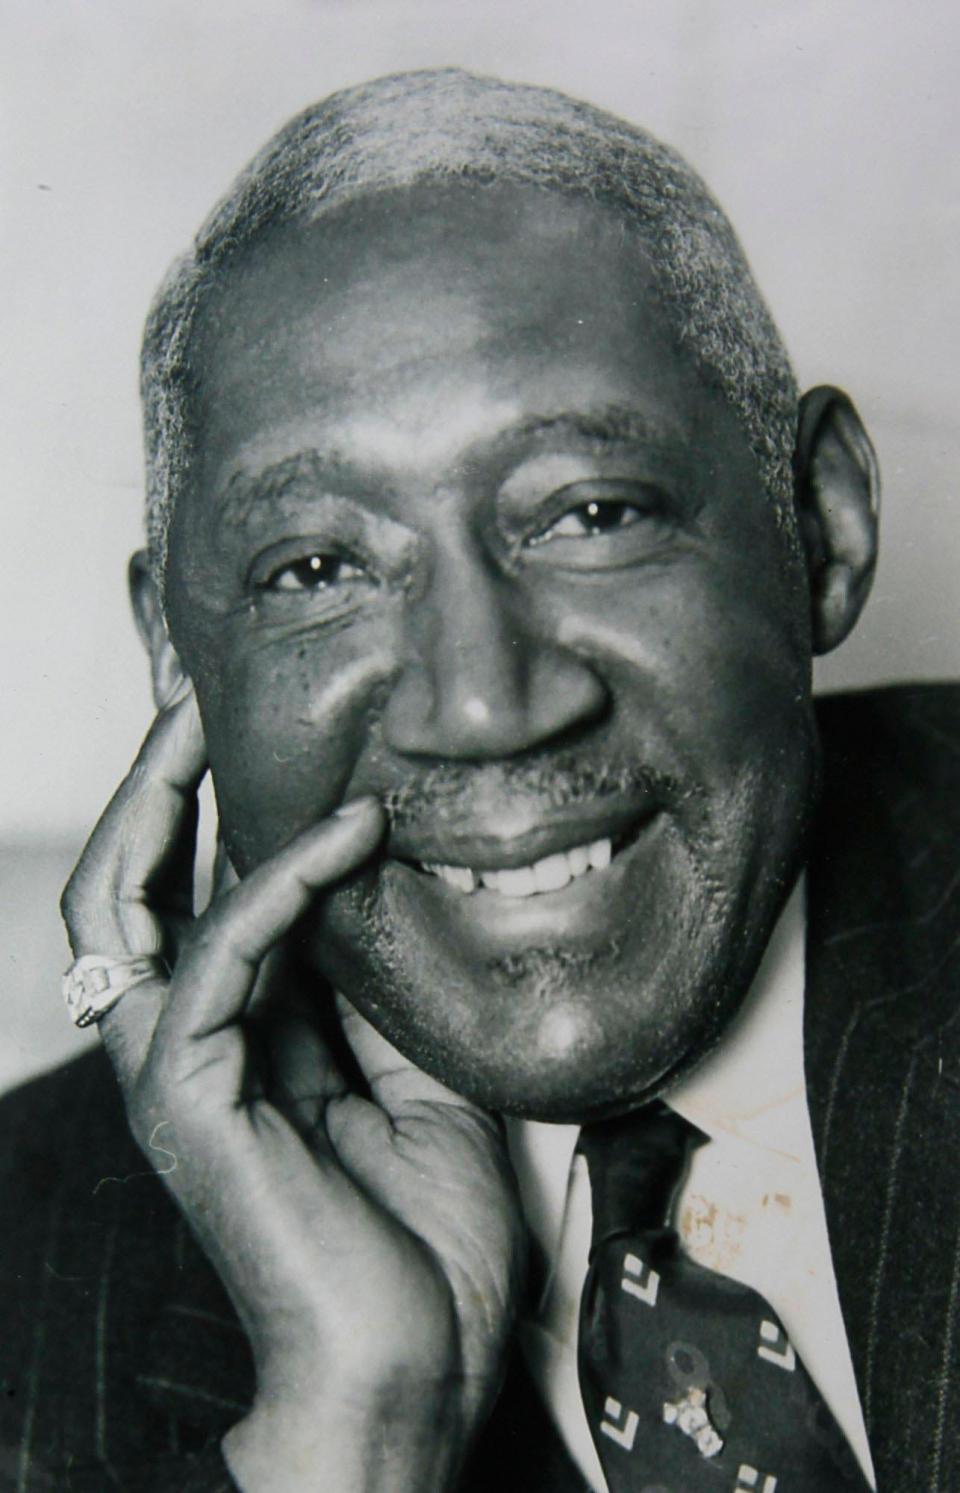 George Mathews, shown here in a 1958 photo, established a scholarship fund at the University of Akron that still exists today.